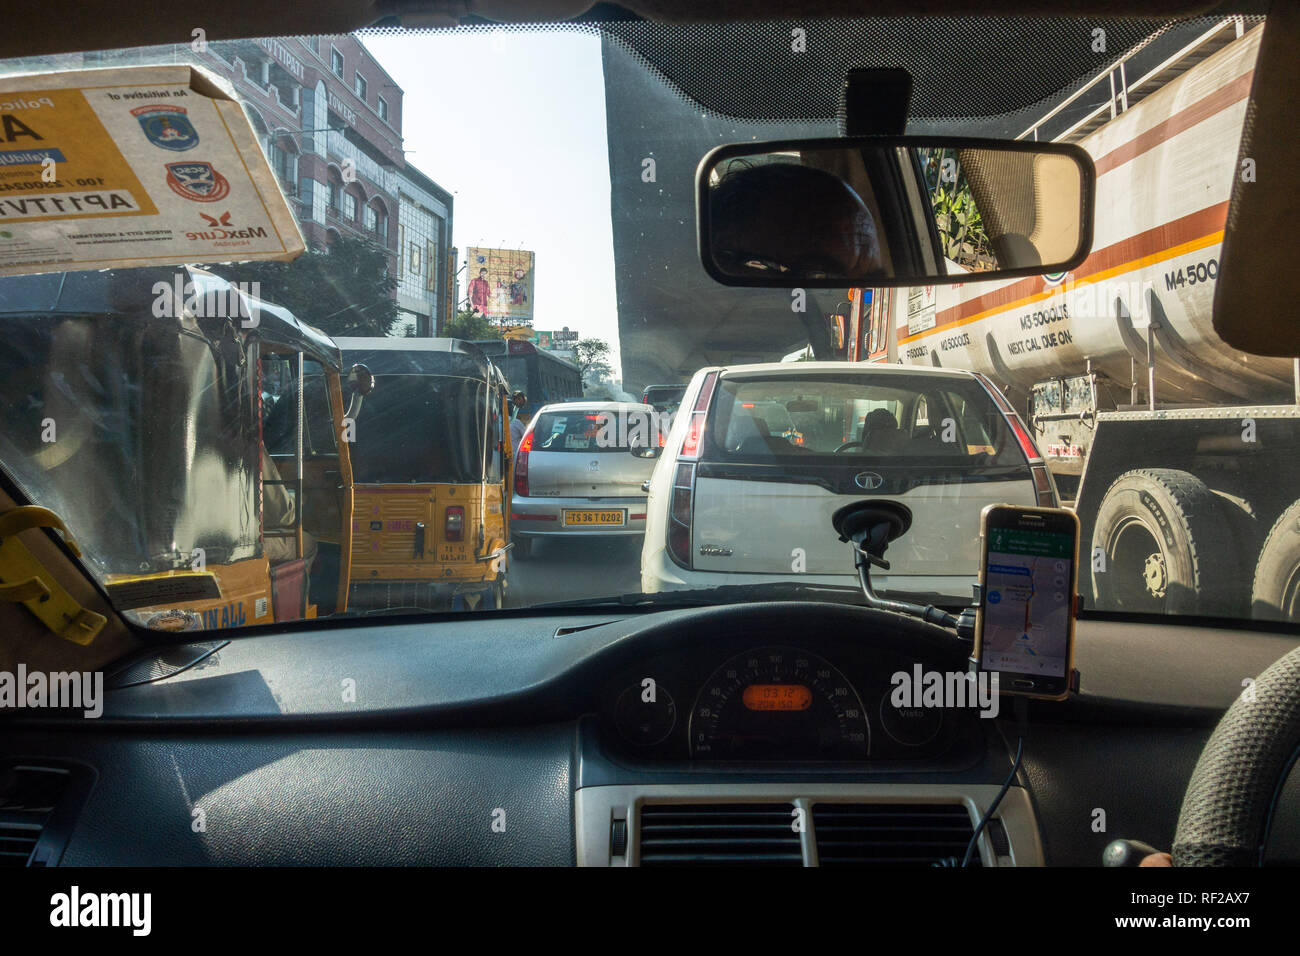 22 Jan 2019,Hyderabad-India.A view of traffic from inside of a taxi cab in Hyderabad,India Stock Photo